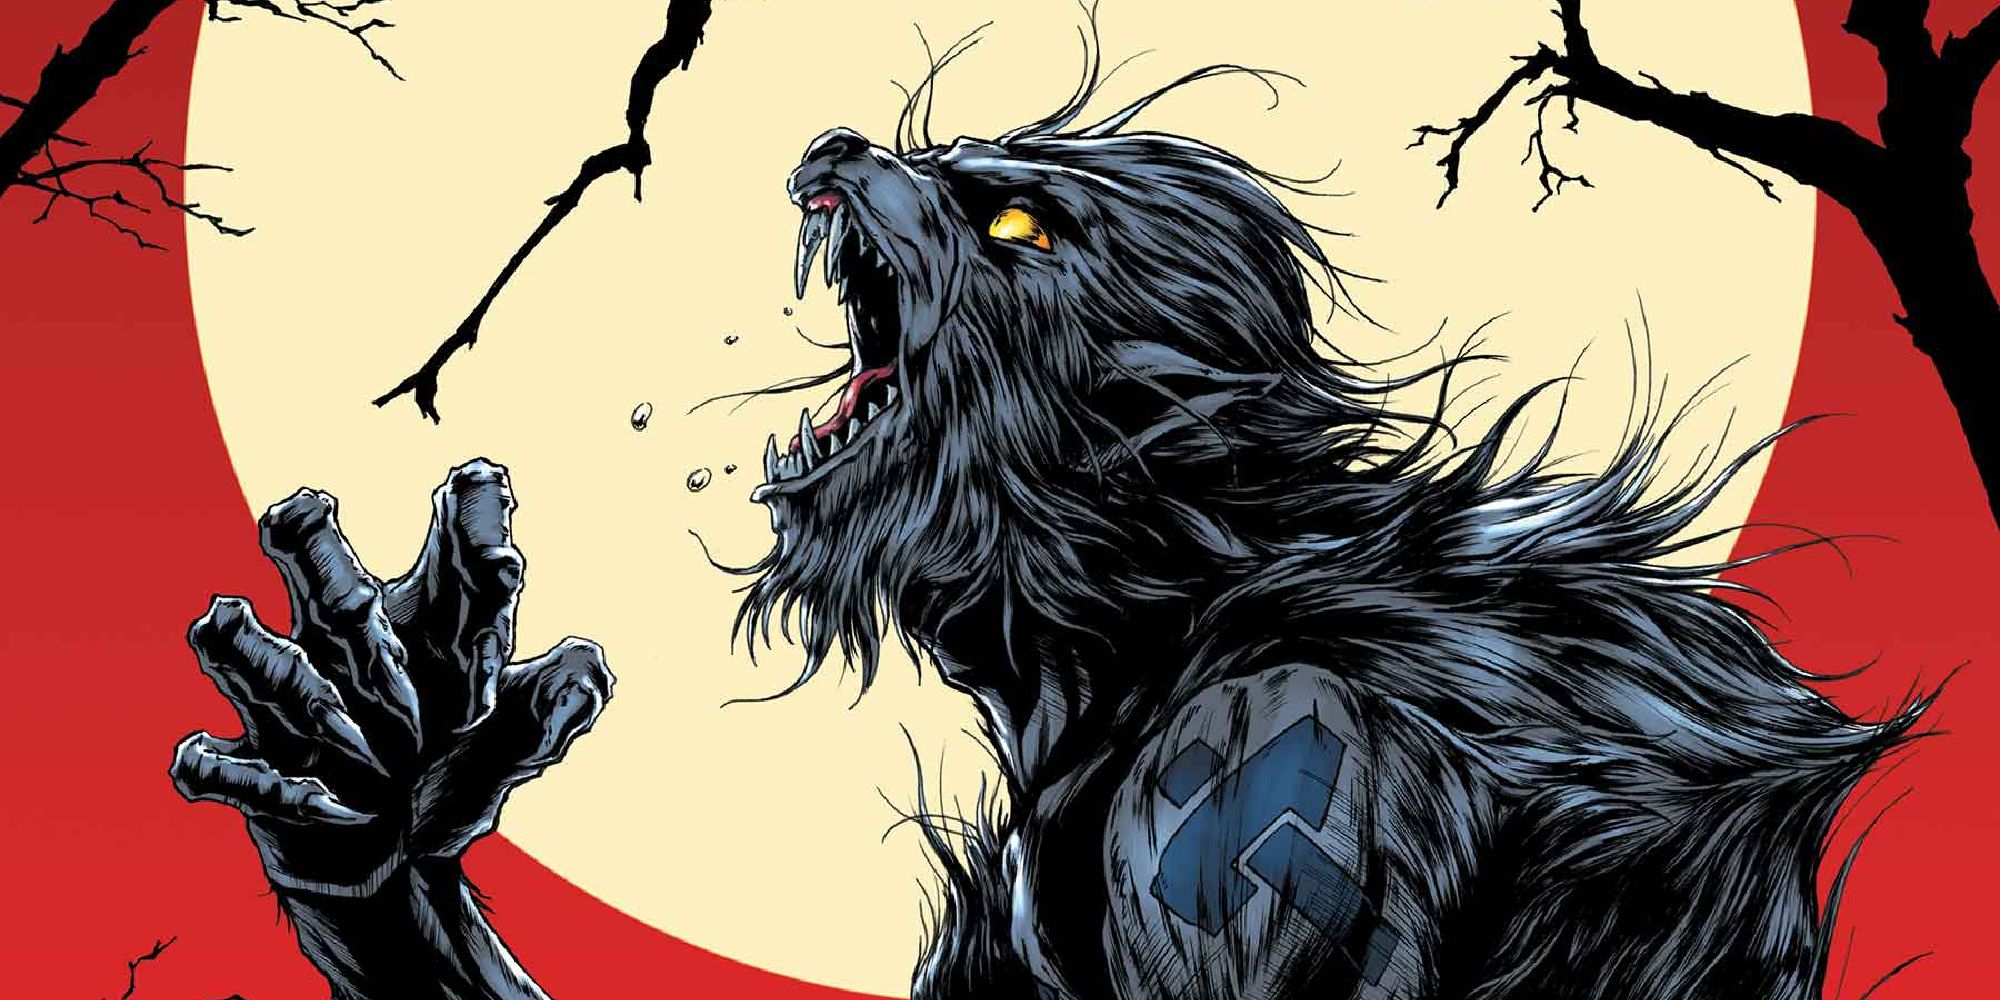 Werewolf By Night from a comic cover recently